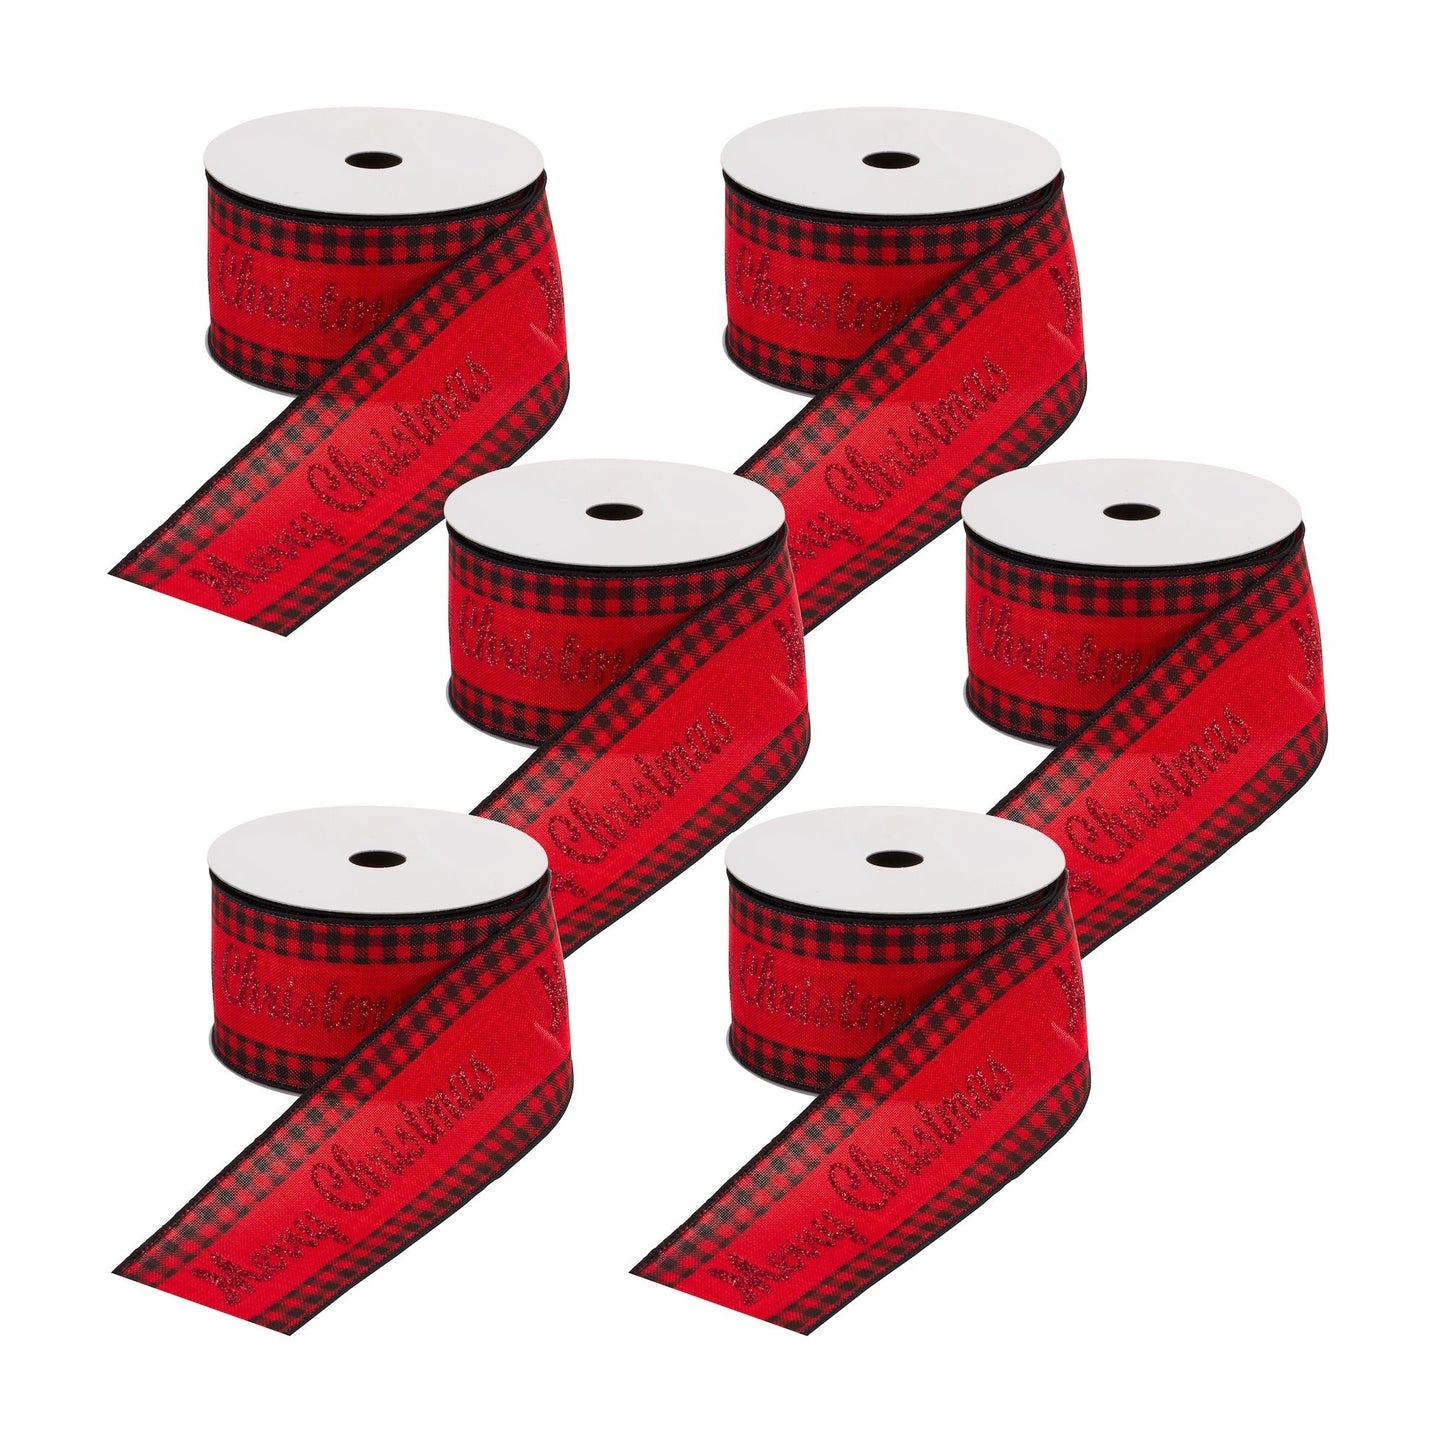 Wired Merry Christmas Ribbon with Buffalo Plaid Accent (Set of 6)